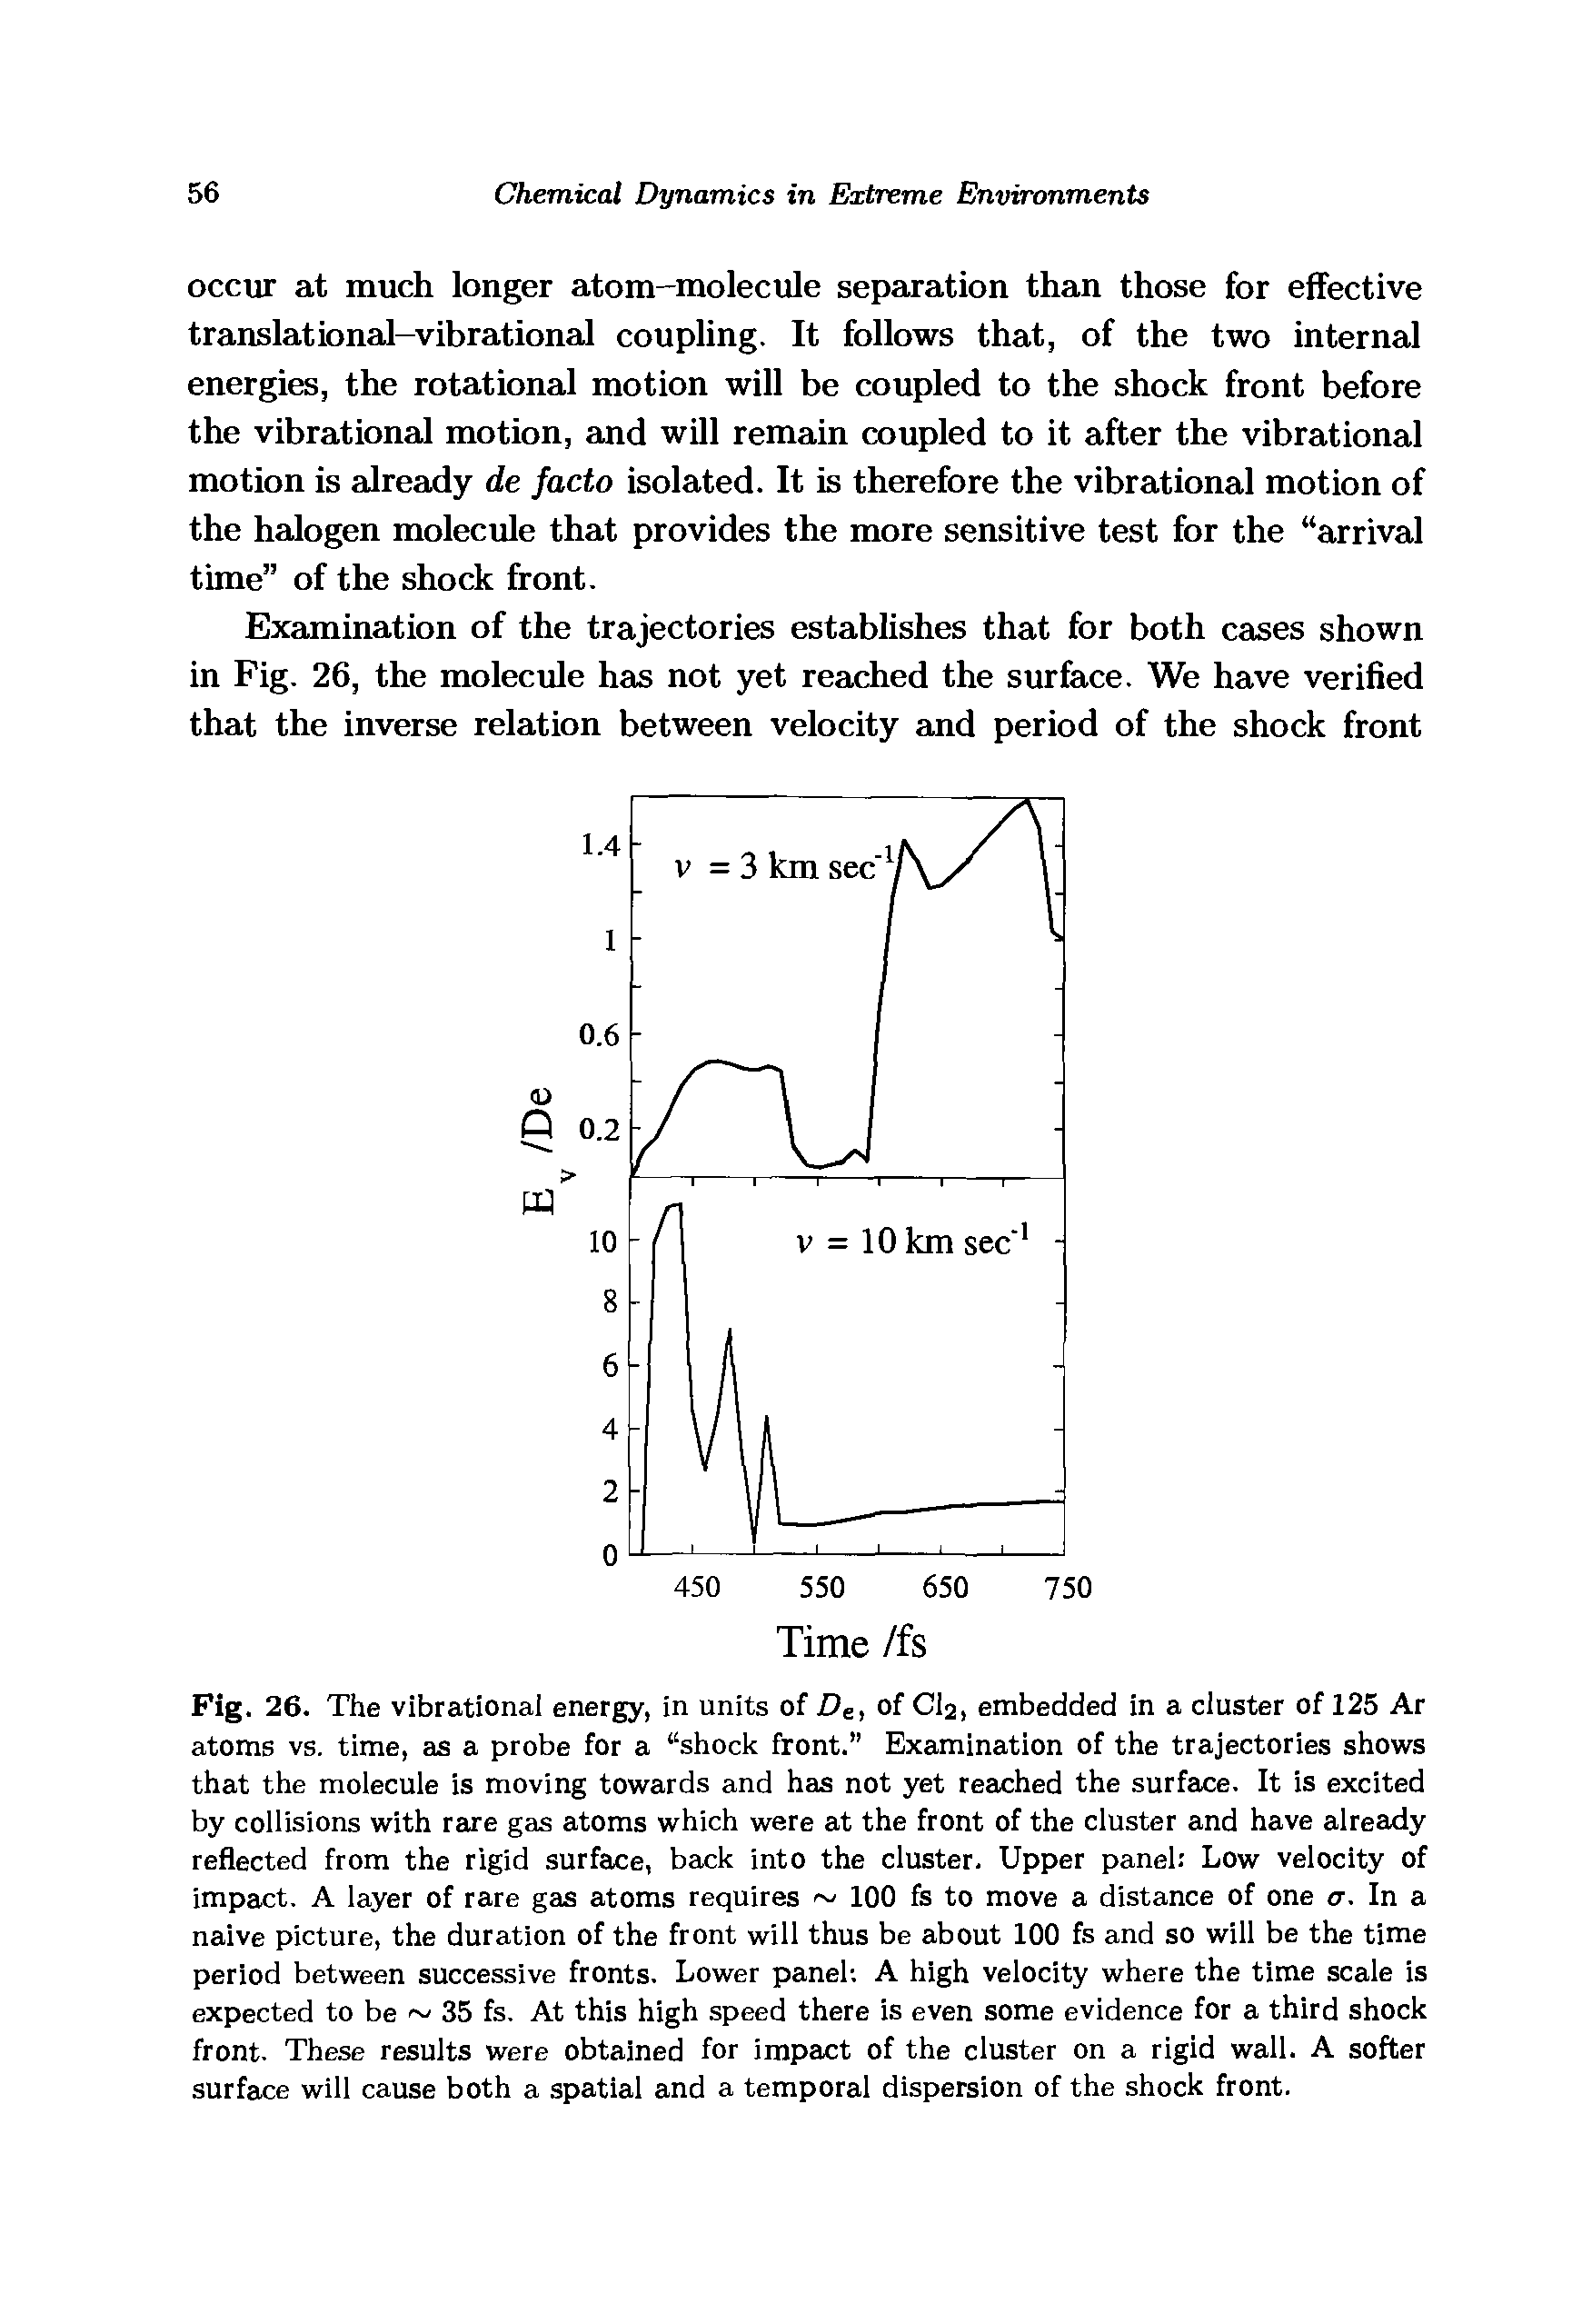 Fig. 26. The vibrational energy, in units of De, of CI2, embedded in a cluster of 125 Ar atoms vs. time, as a probe for a shock front. Examination of the trajectories shows that the molecule is moving towards and has not yet reached the surface. It is excited by collisions with rru e gas atoms which were at the front of the cluster and have already reflected from the rigid surface, back into the cluster. Upper panel Low velocity of impact. A layer of rare gas atoms requires 100 fs to move a distance of one <r. In a naive picture, the duration of the front will thus be about 100 fs and so will be the time period between successive fronts. Lower panel A high velocity where the time scale is expected to be 35 fs. At this high speed there is even some evidence for a third shock front. These results were obtained for impact of the cluster on a rigid wall. A softer surface will cause both a spatial and a temporal dispersion of the shock front.